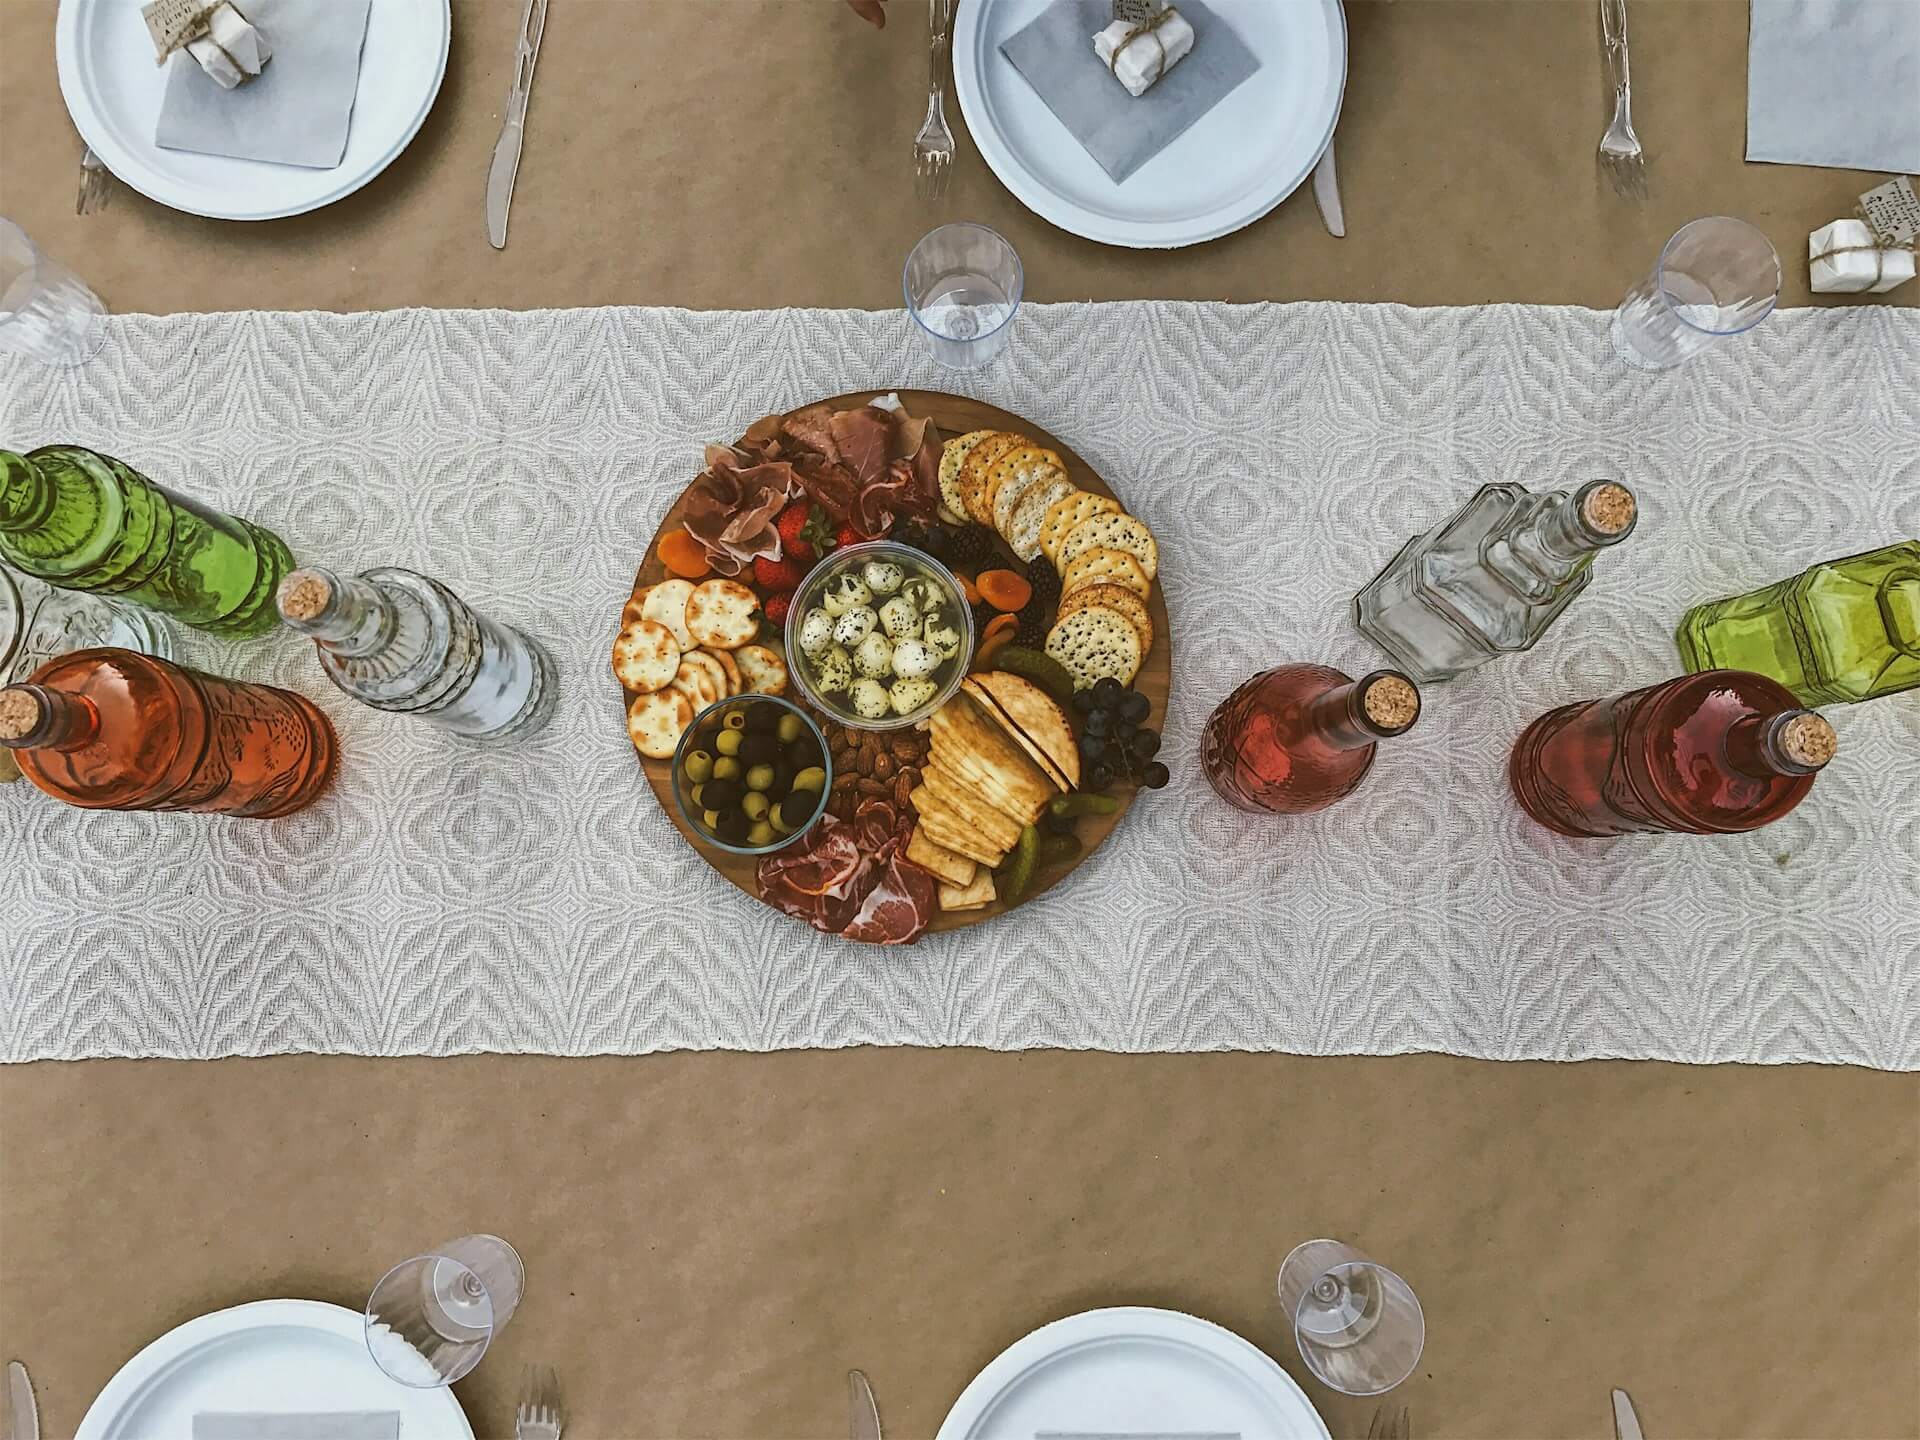 6 Tips For Hosting the Perfect Dinner Party